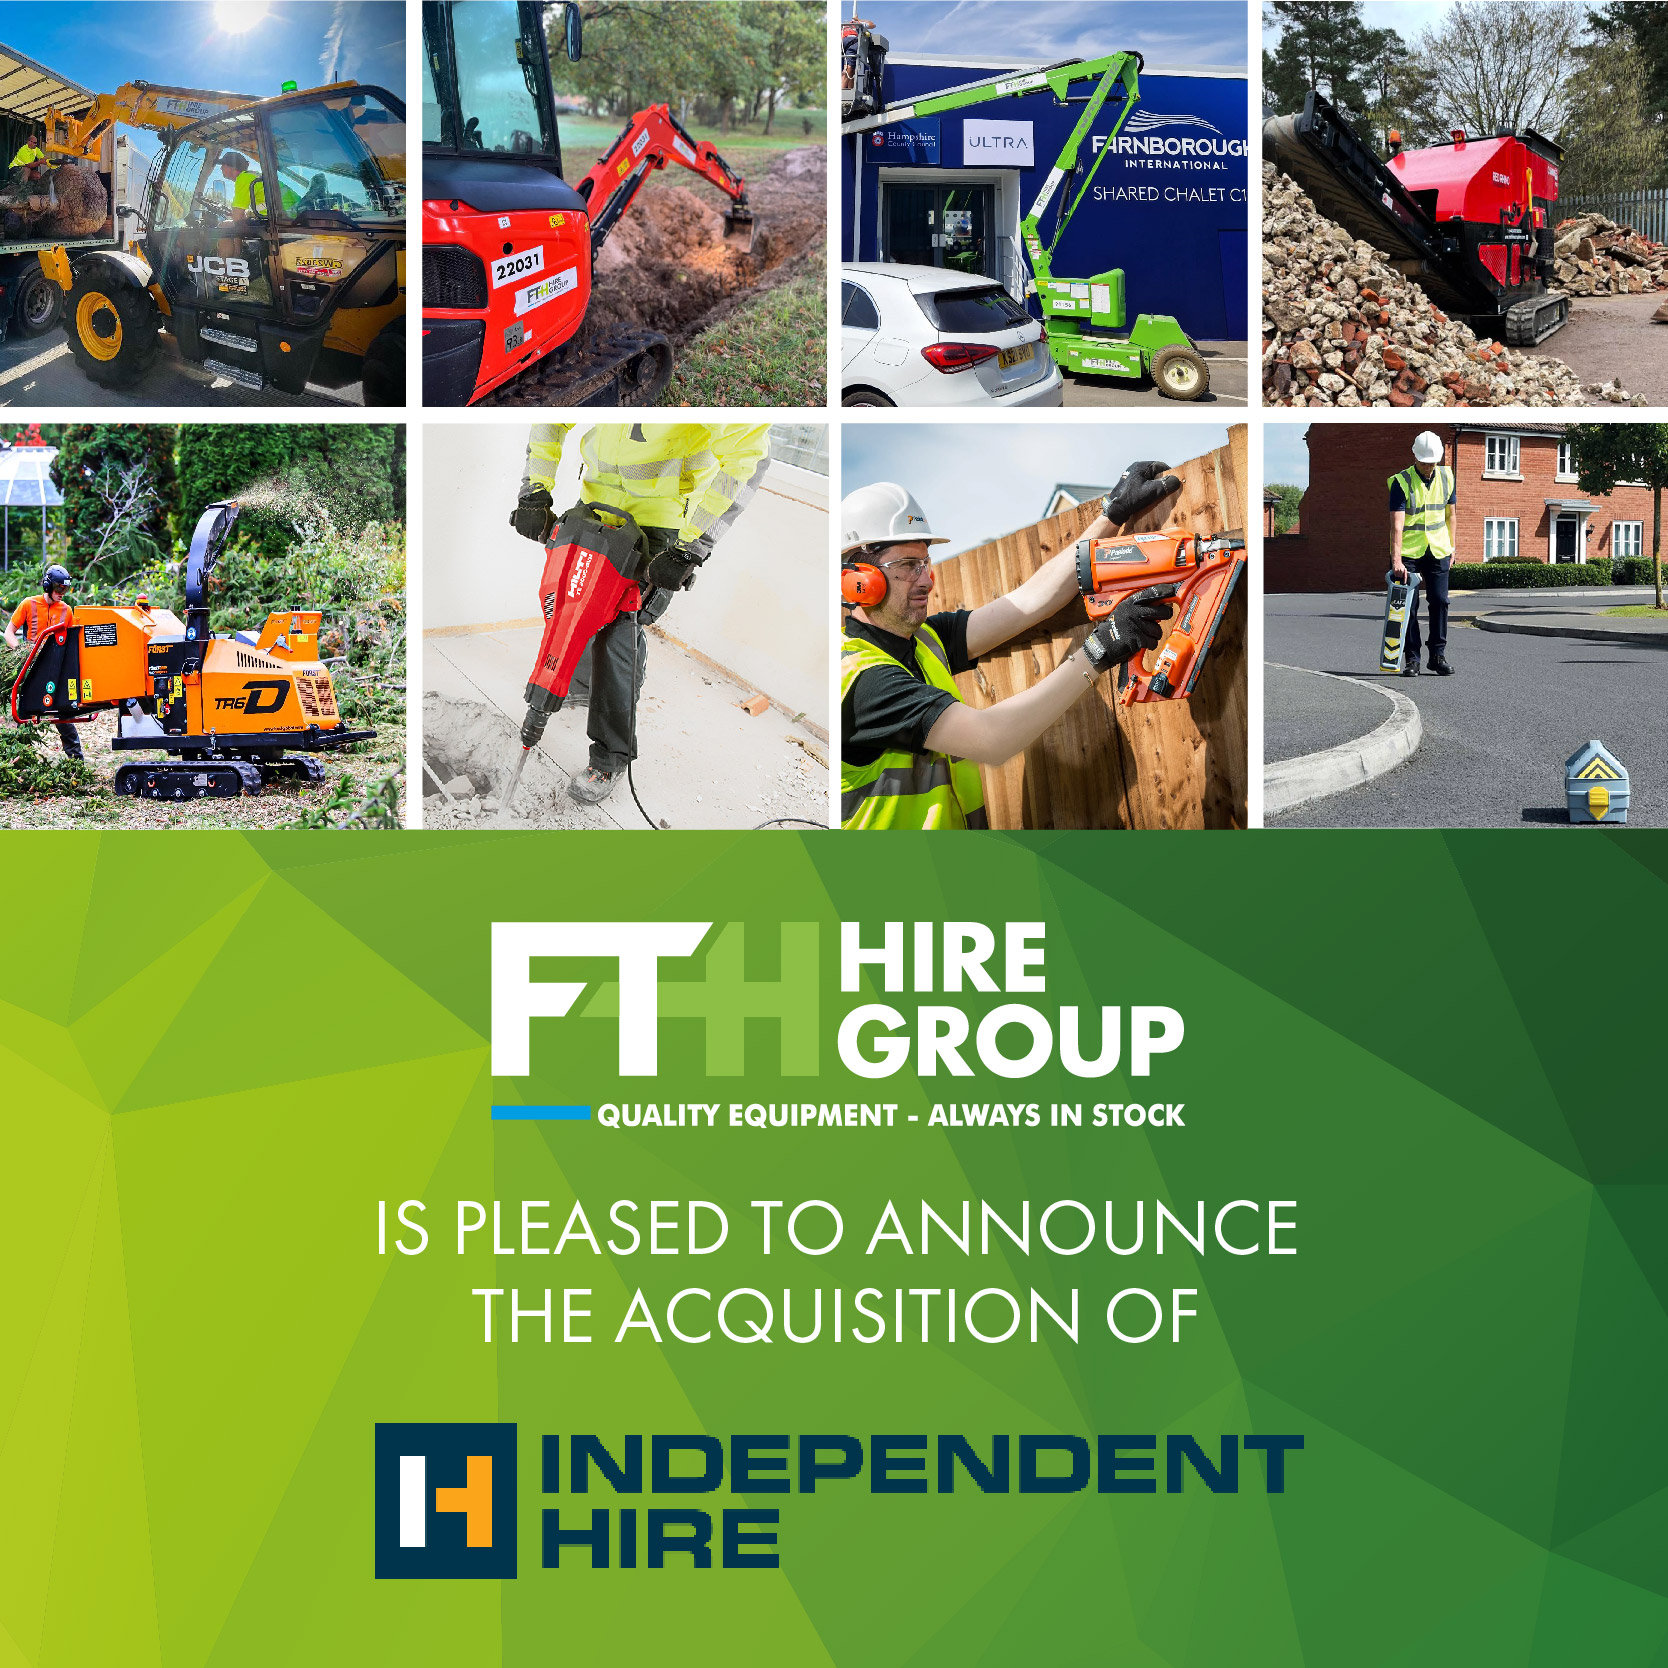 Independent Hire joins the FTH Hire Group